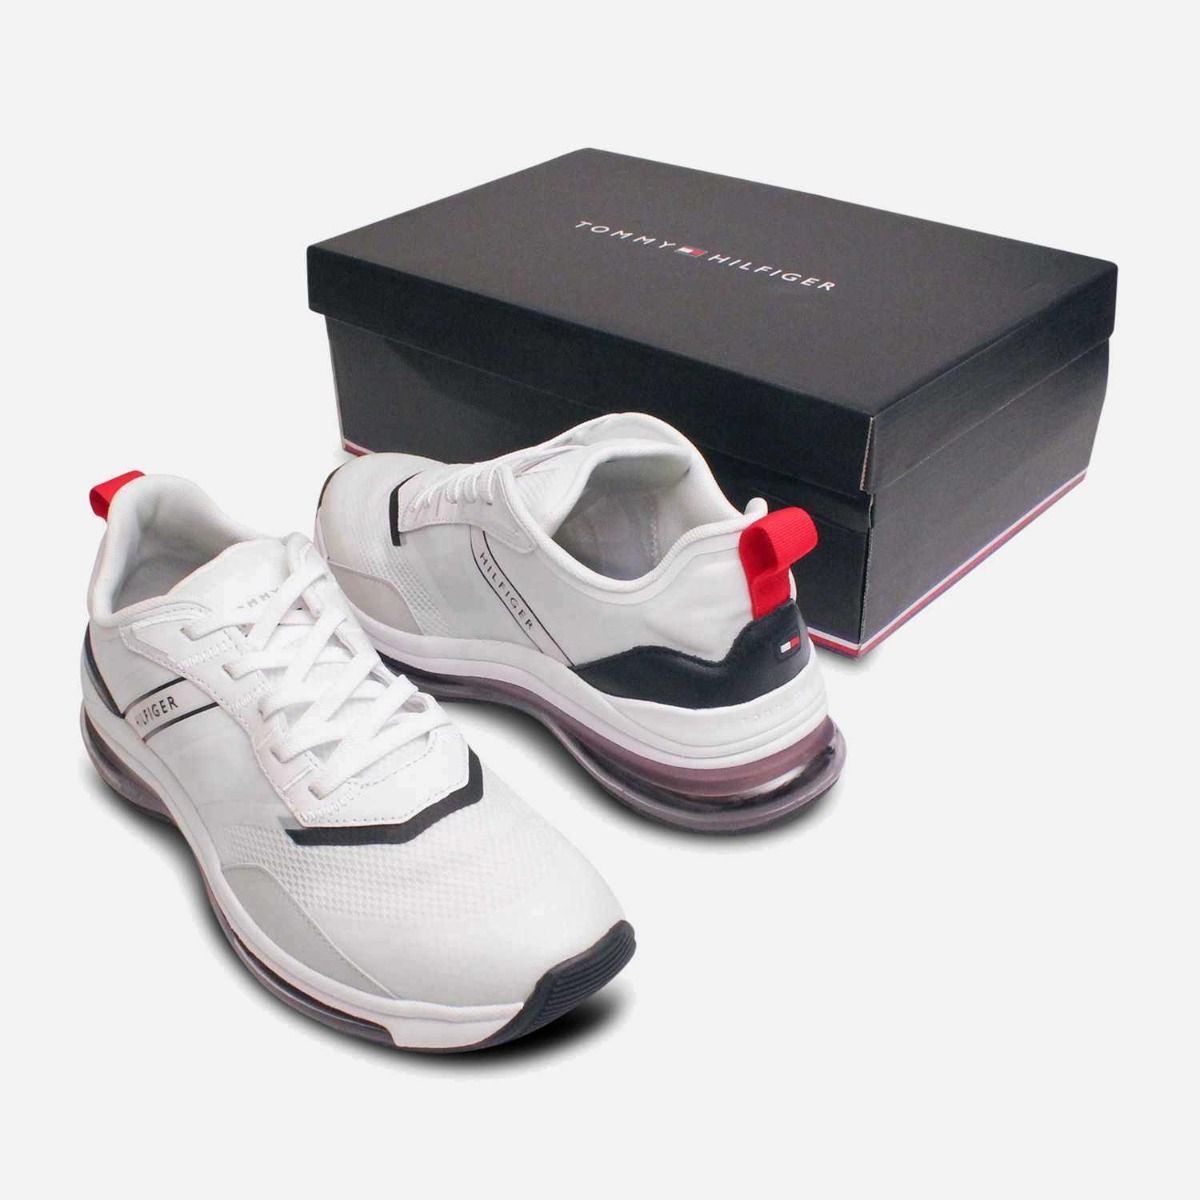 Tommy Hilfiger Air Sports Shoes White